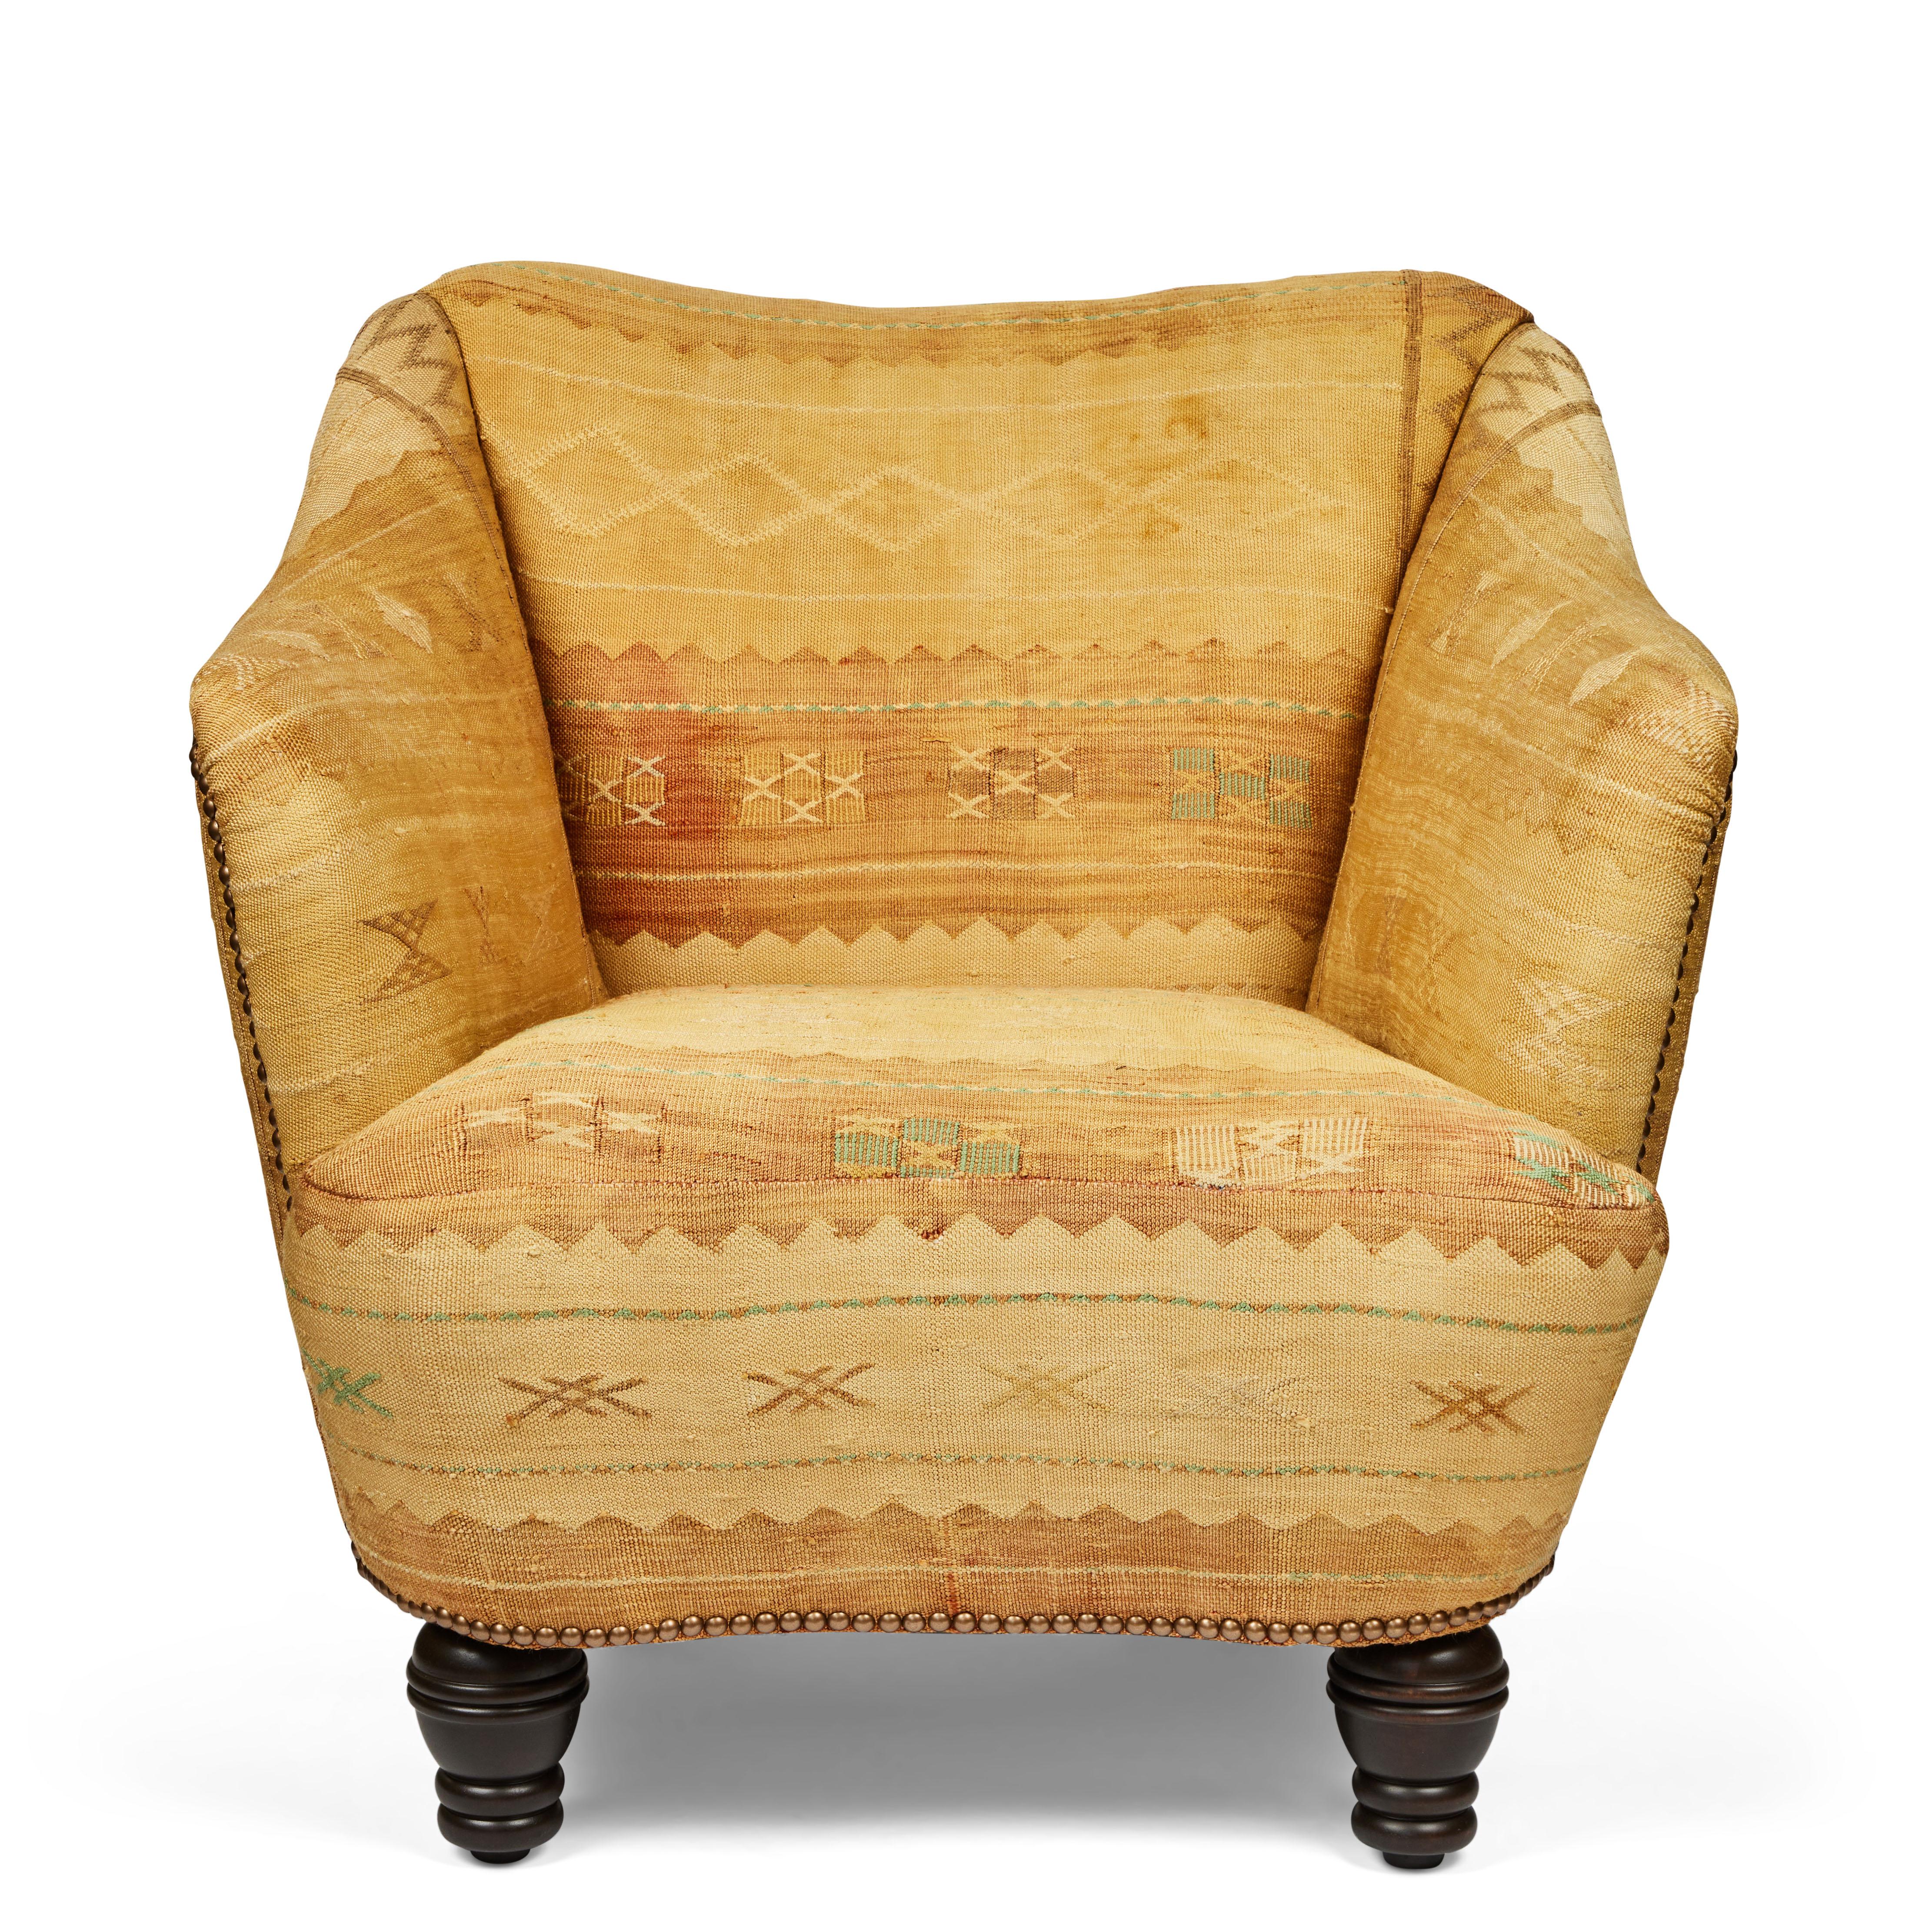 Tapestry Upholstered Chair - 2 For Sale on 1stDibs